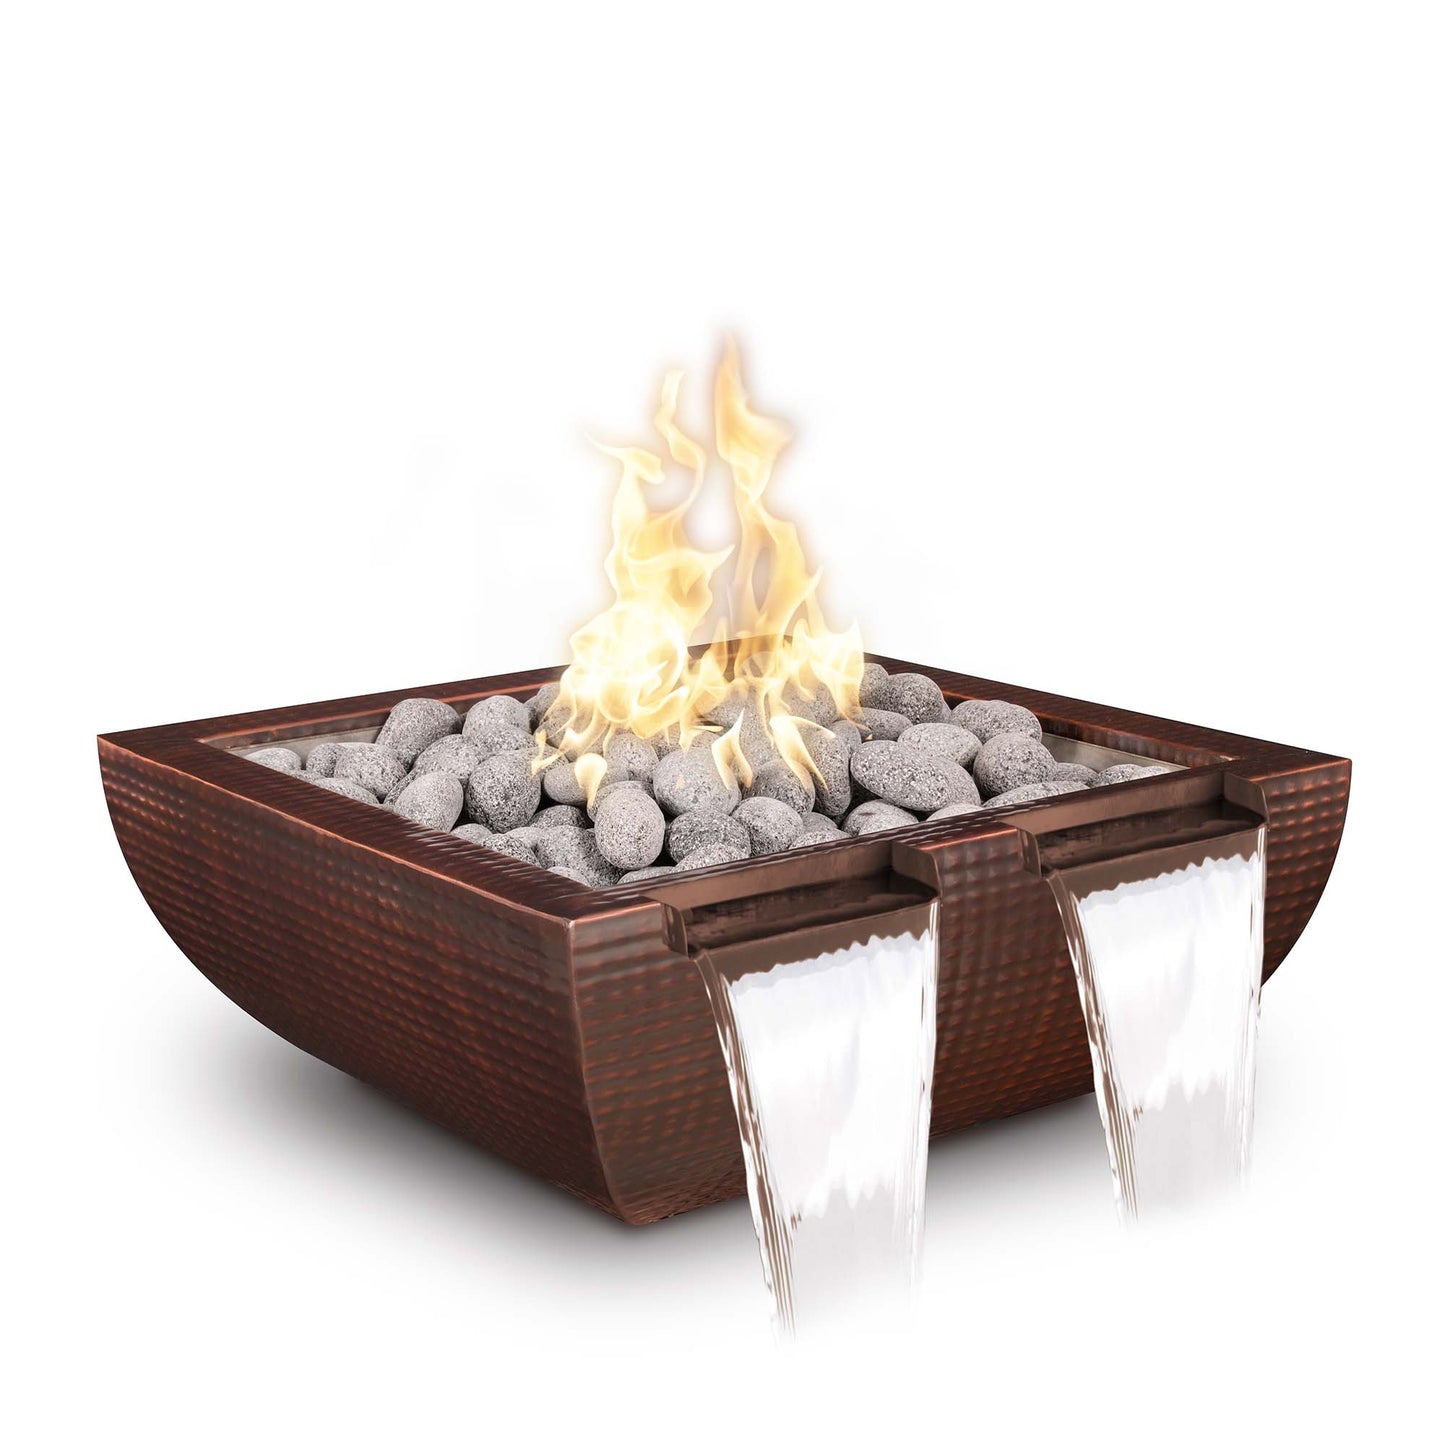 The Outdoor Plus Avalon Twin Spill 36" Copper Vein Powder Coated Metal Liquid Propane Fire & Water Bowl with Match Lit Ignition